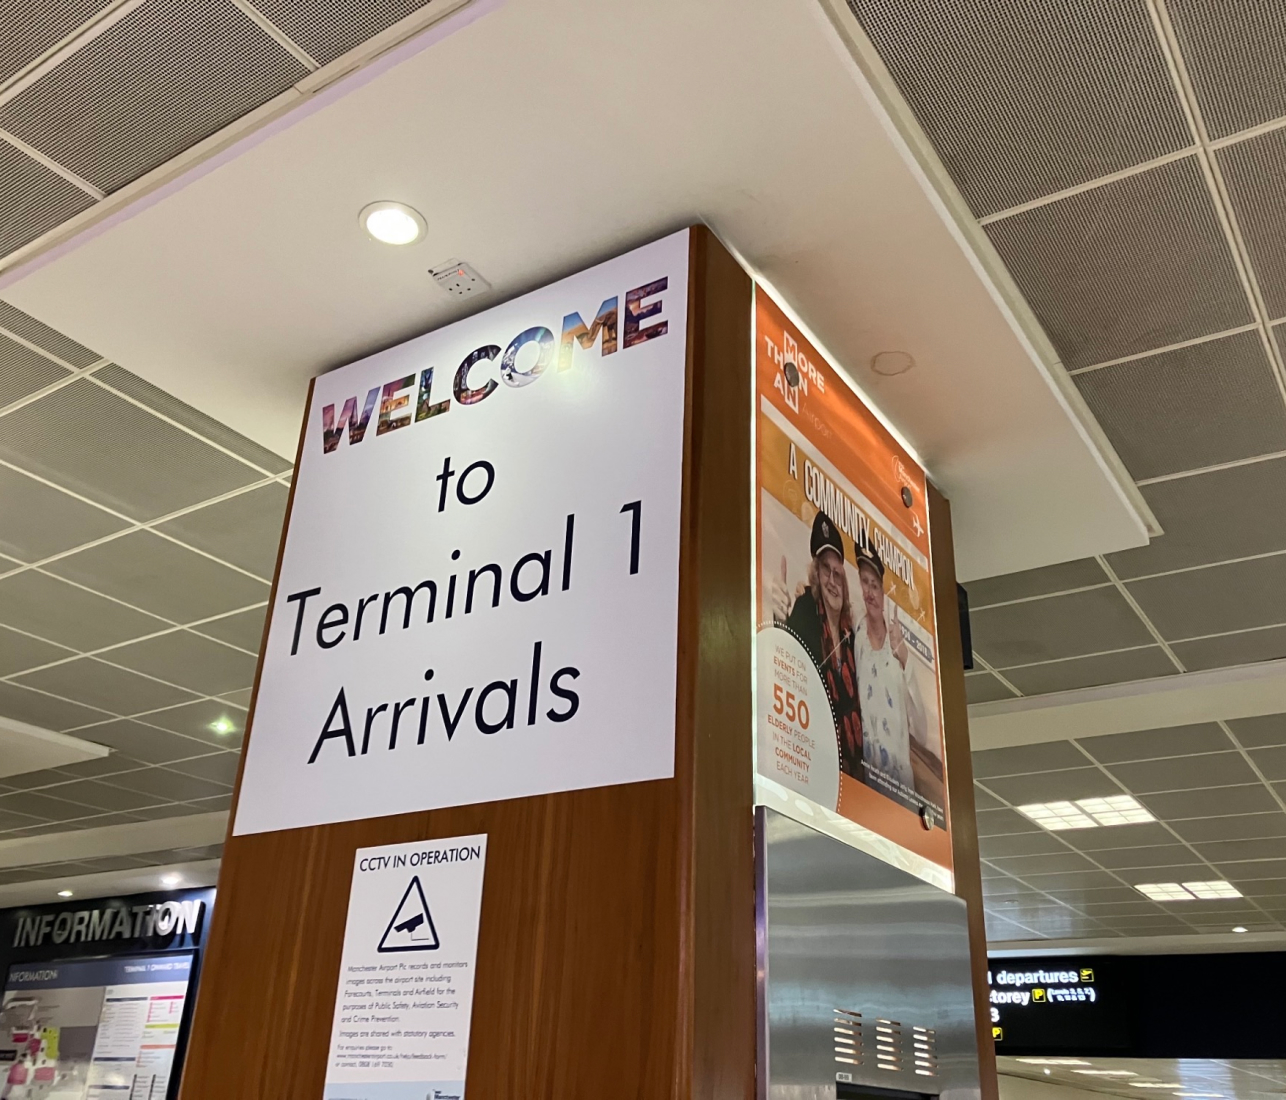 Sign in airport on pillar saying welcome to terminal 1 arrivals